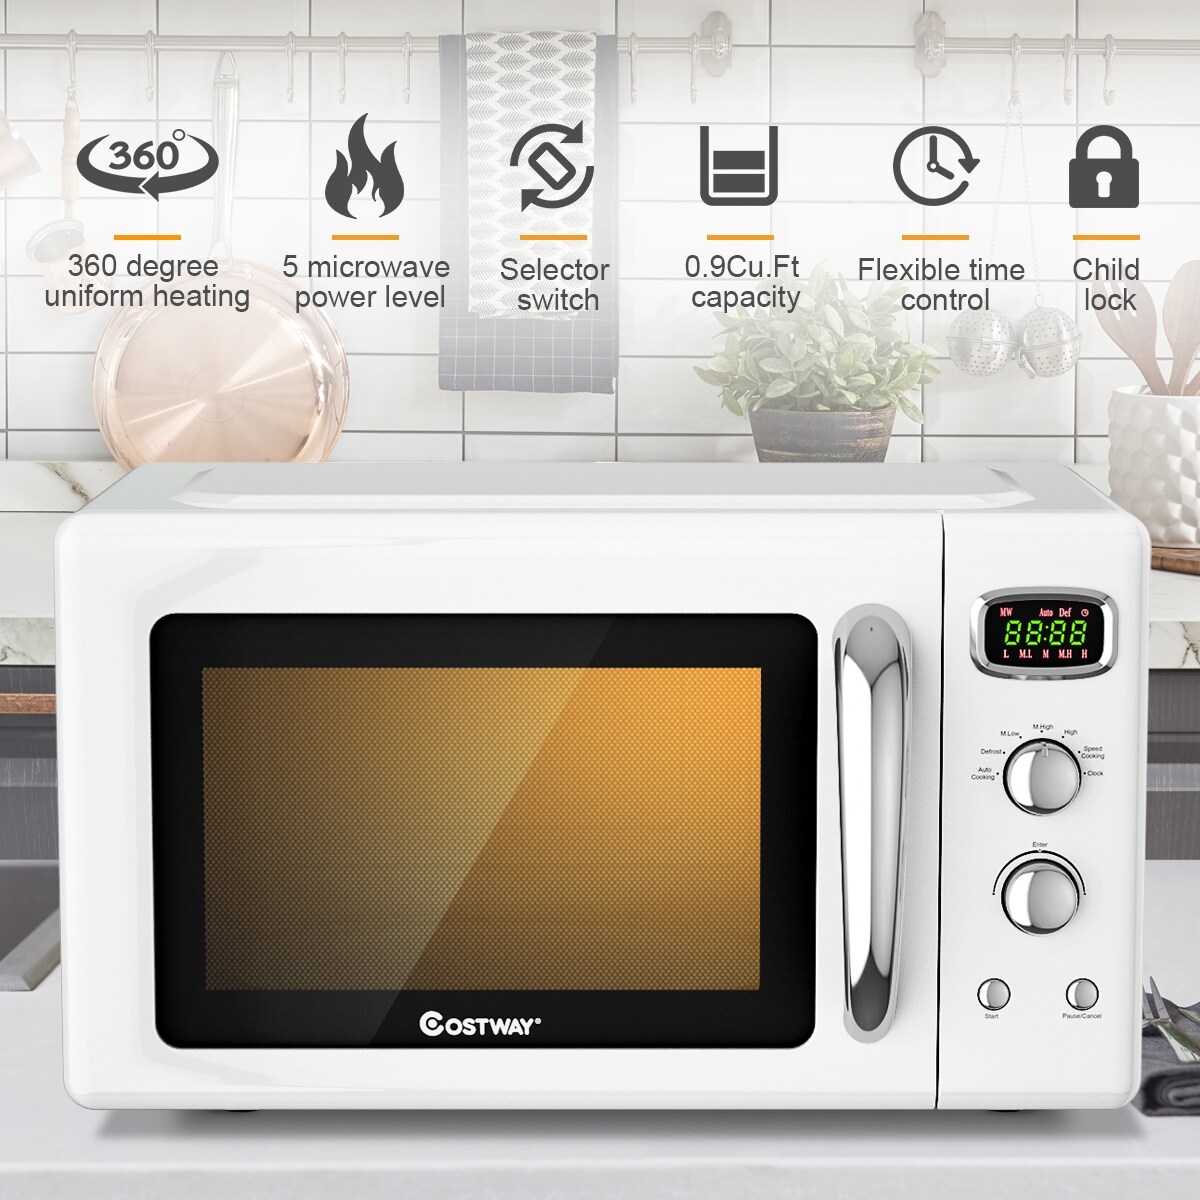 https://ak1.ostkcdn.com/images/products/is/images/direct/8b2a78c1b6e2f1ad82cd50472ee236da50d9ffa2/Costway-0.9Cu.ft.-Retro-Countertop-Compact-Microwave-Oven-900W-8.jpg